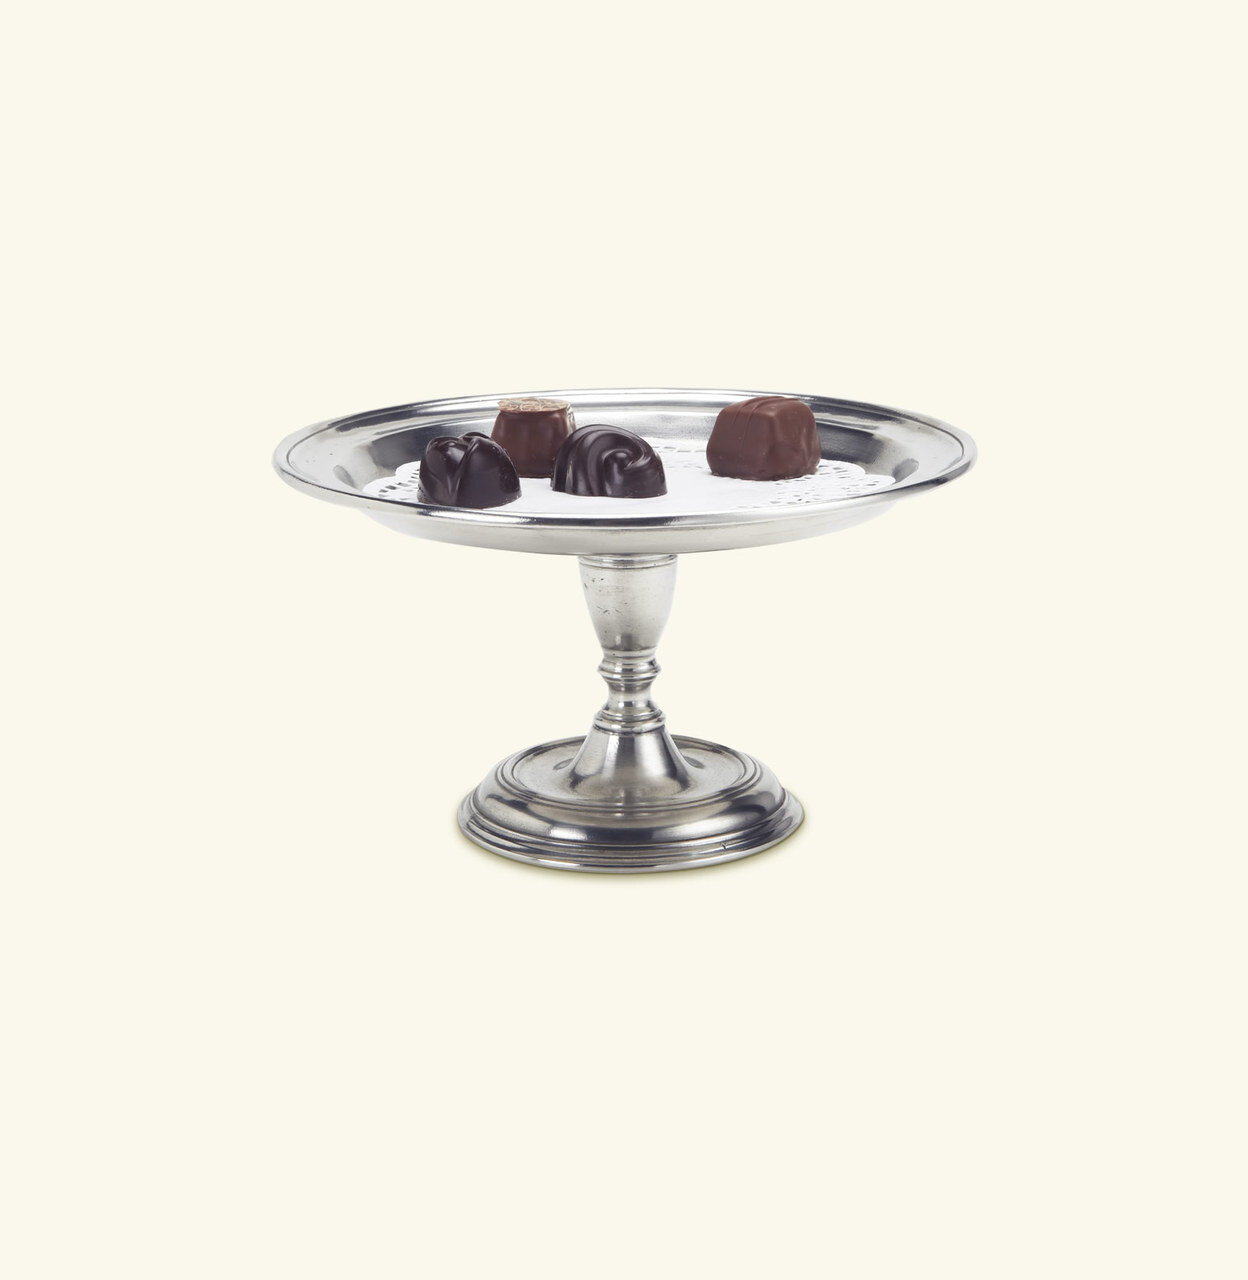 Match Pewter Pedestal Tray Small 1249